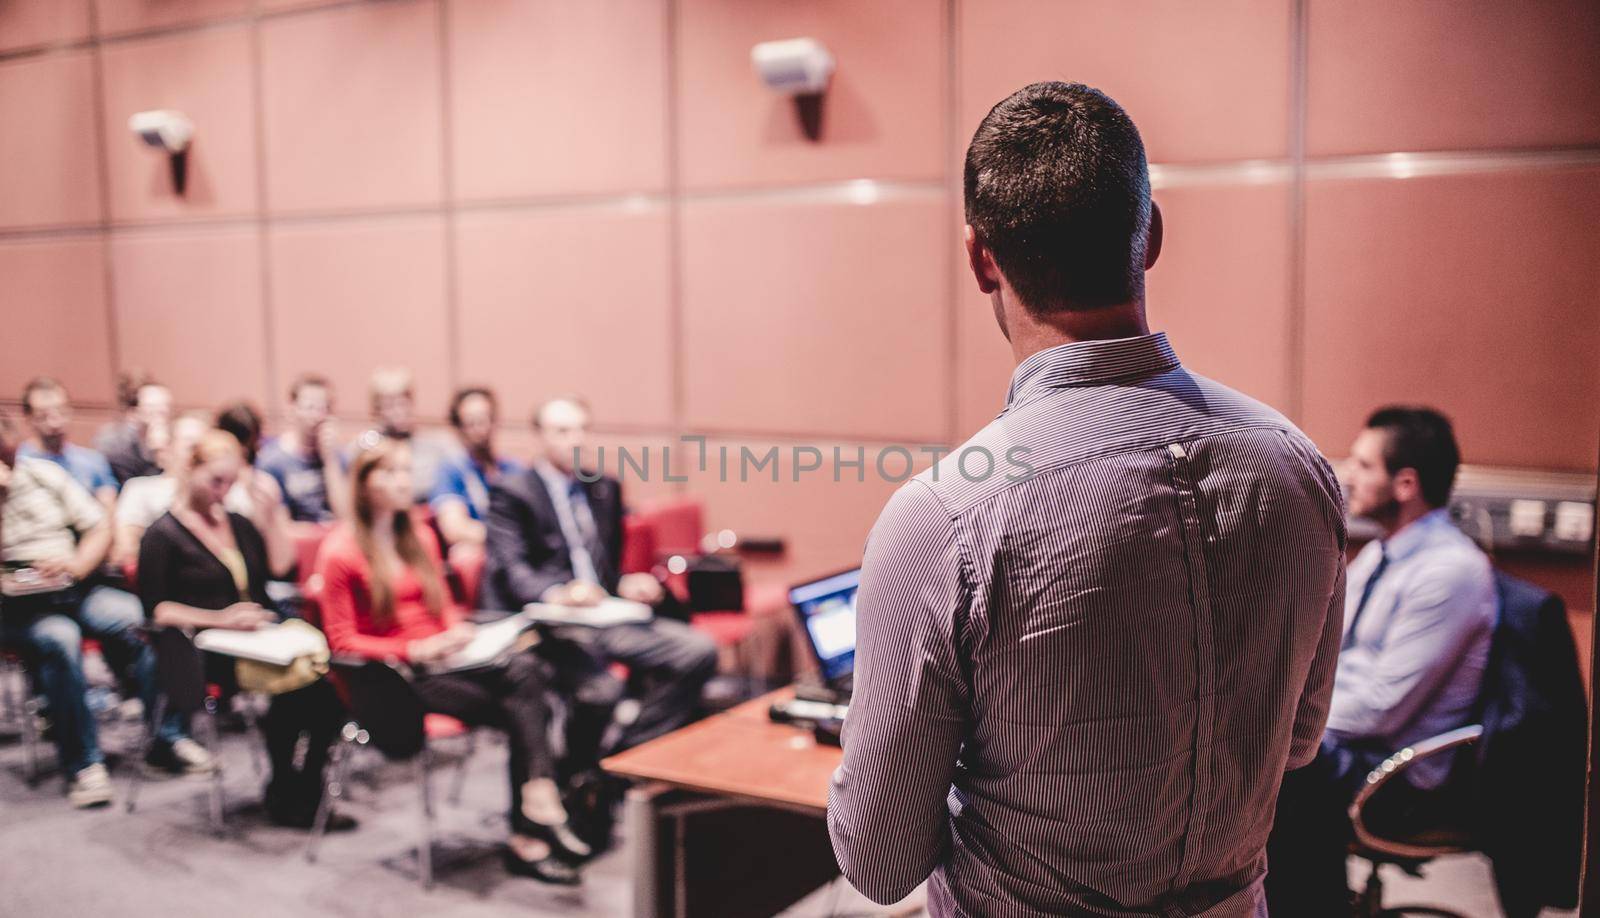 Speaker at Business Conference with Public Presentations. Audience at the conference hall. Business and Entrepreneurship concept. Background blur. Shallow depth of field.